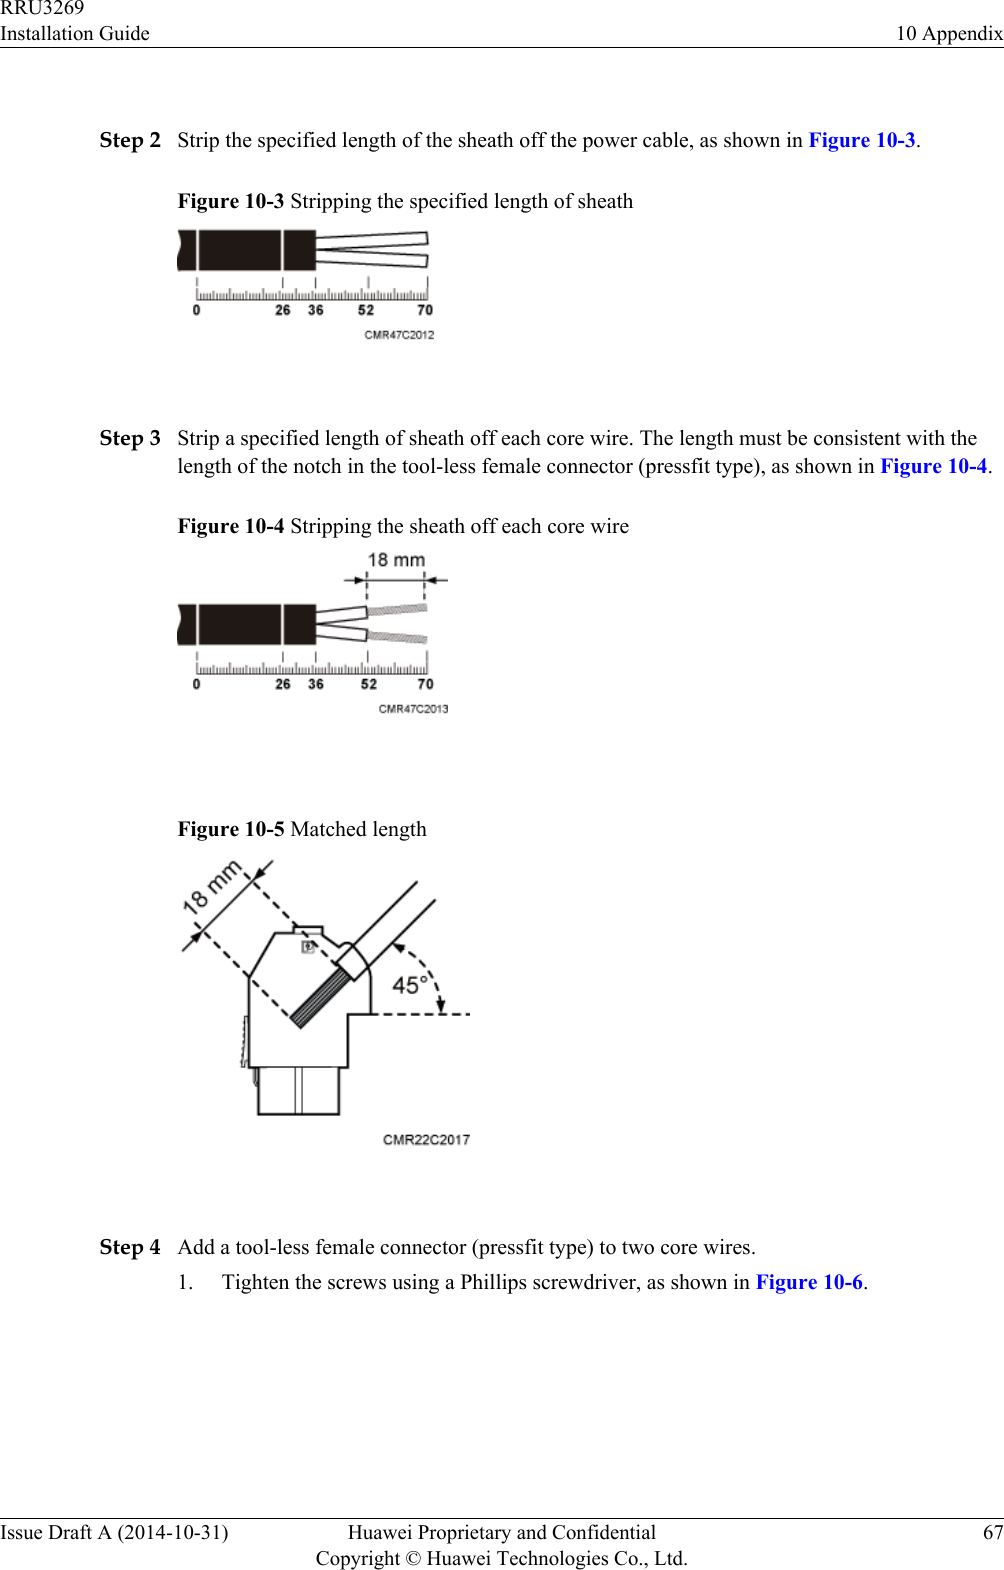  Step 2 Strip the specified length of the sheath off the power cable, as shown in Figure 10-3.Figure 10-3 Stripping the specified length of sheath Step 3 Strip a specified length of sheath off each core wire. The length must be consistent with thelength of the notch in the tool-less female connector (pressfit type), as shown in Figure 10-4.Figure 10-4 Stripping the sheath off each core wire Figure 10-5 Matched length Step 4 Add a tool-less female connector (pressfit type) to two core wires.1. Tighten the screws using a Phillips screwdriver, as shown in Figure 10-6.RRU3269Installation Guide 10 AppendixIssue Draft A (2014-10-31) Huawei Proprietary and ConfidentialCopyright © Huawei Technologies Co., Ltd.67